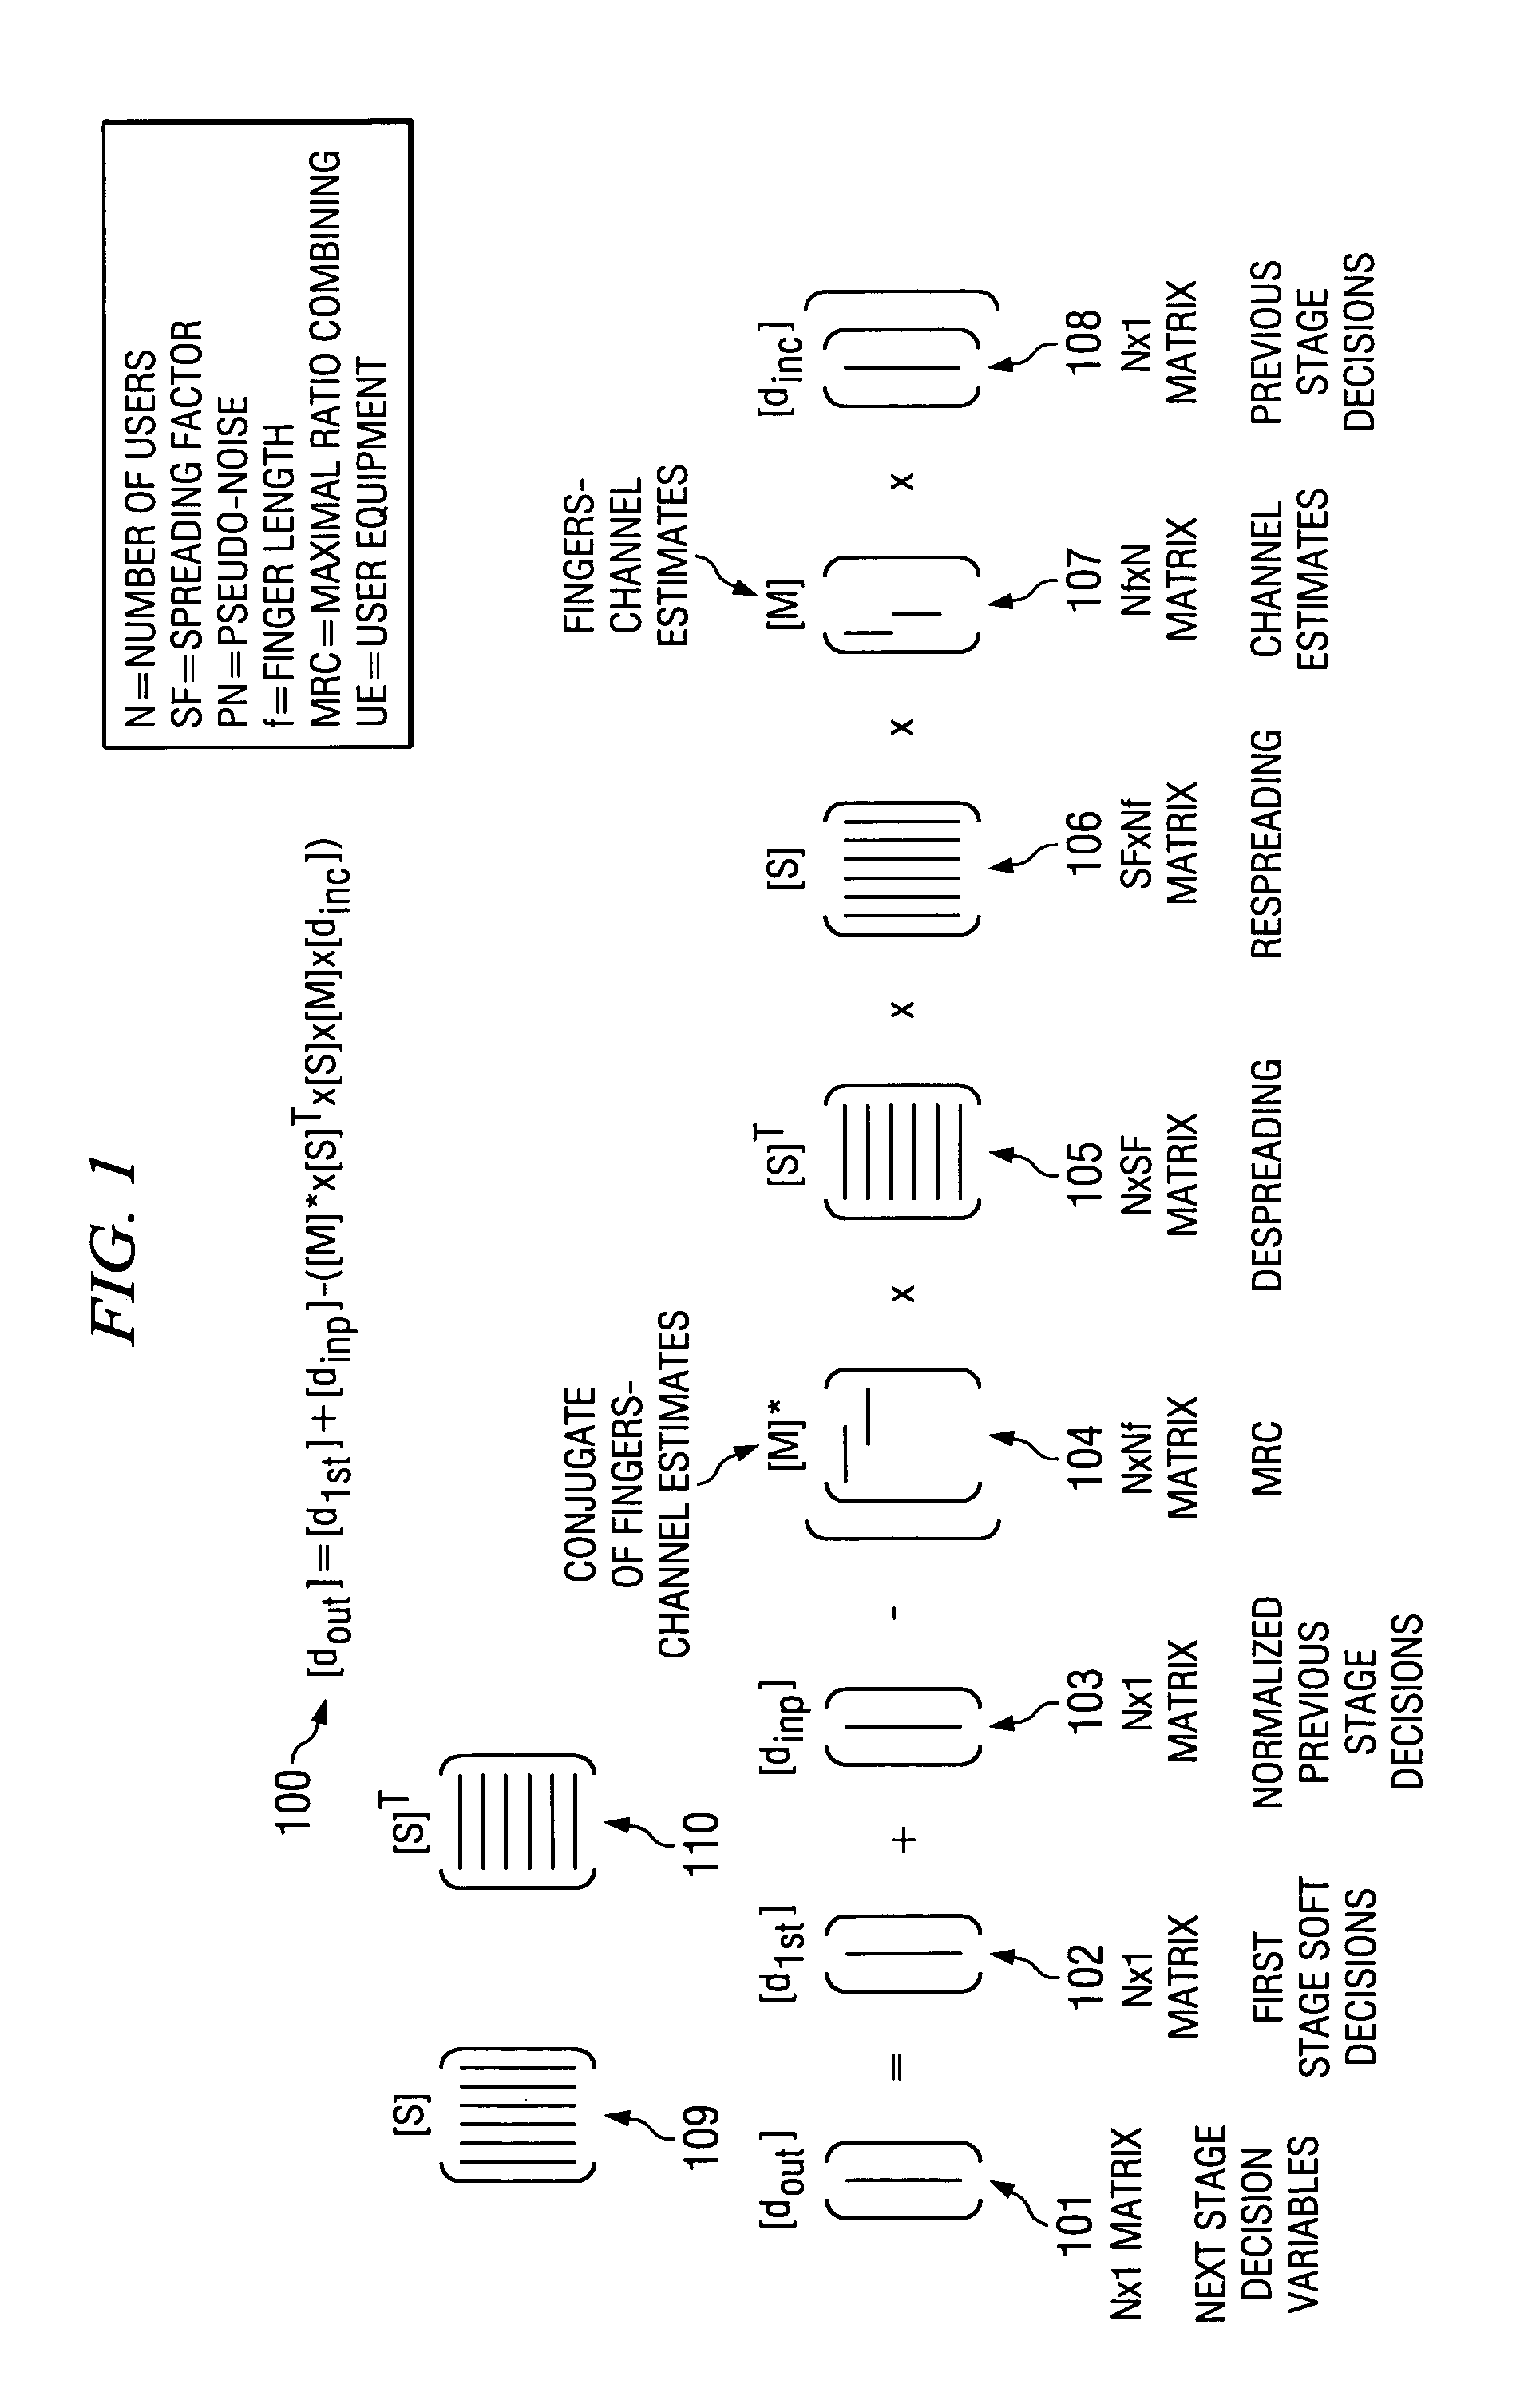 Parallel interference cancellation device for multi-user CDMA systems